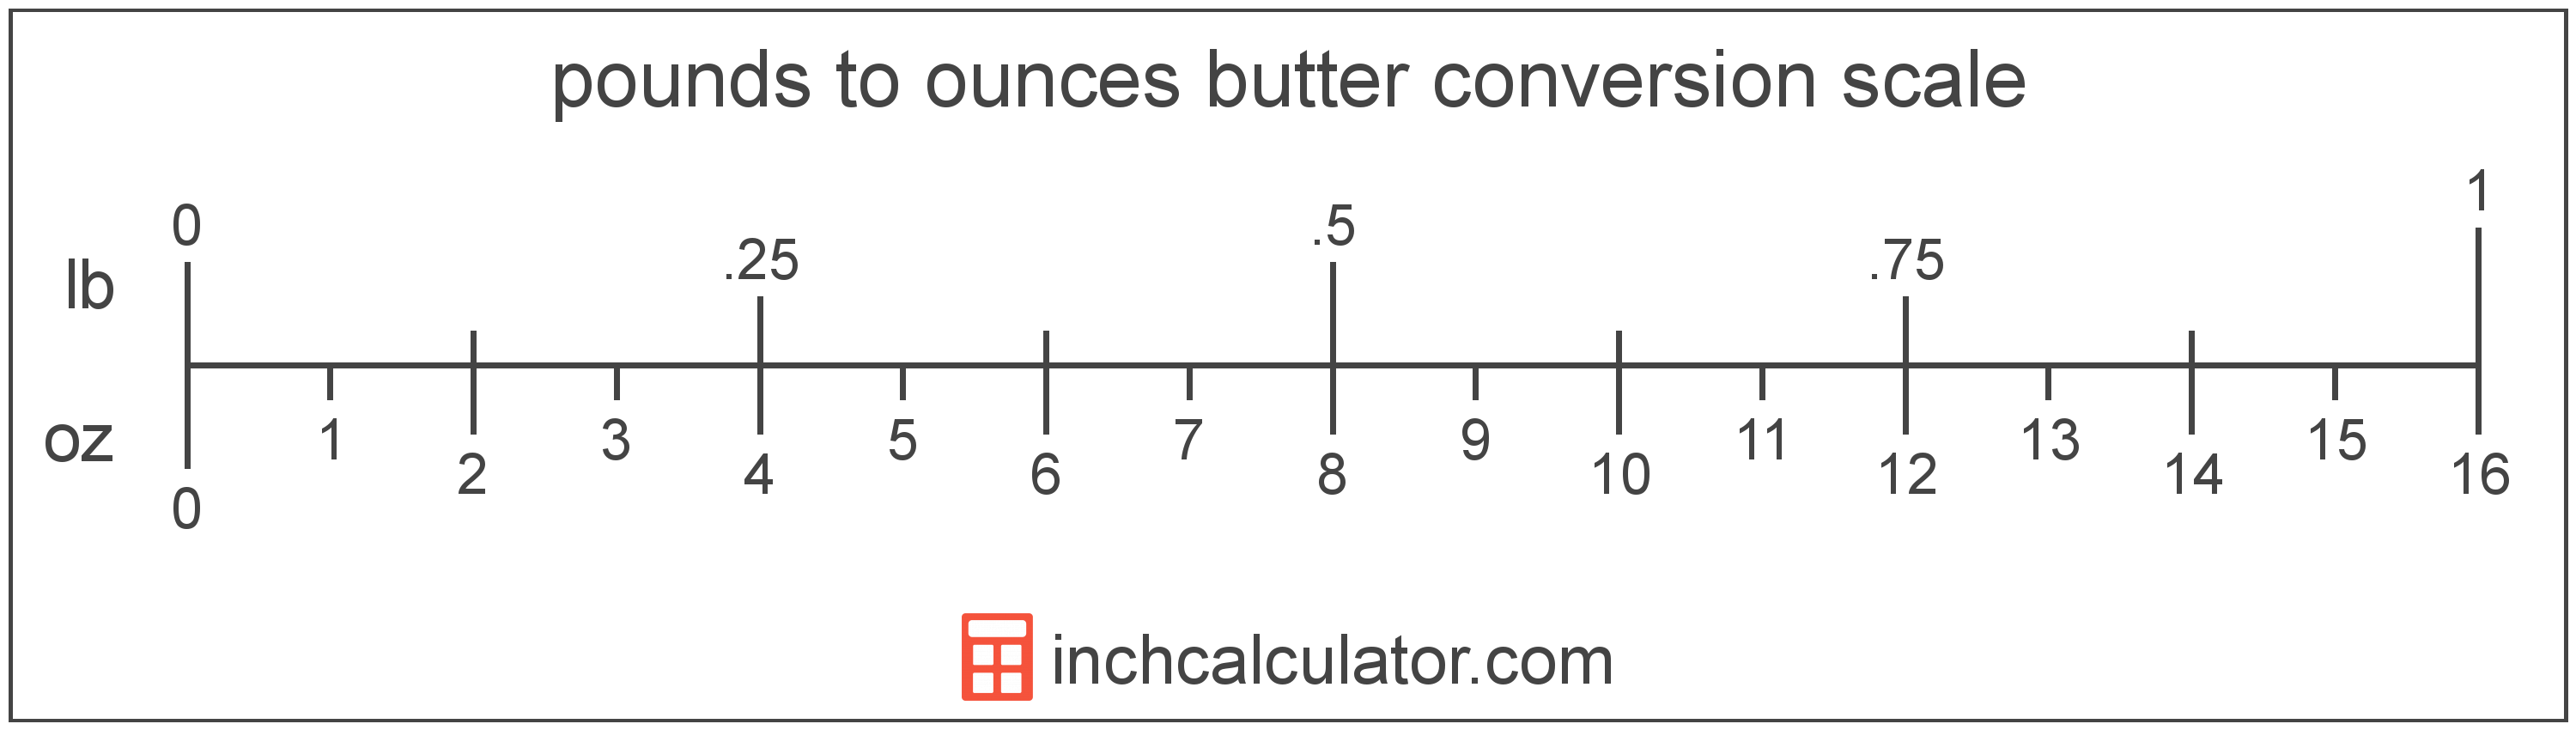 conversion scale showing pounds and equivalent ounces butter values